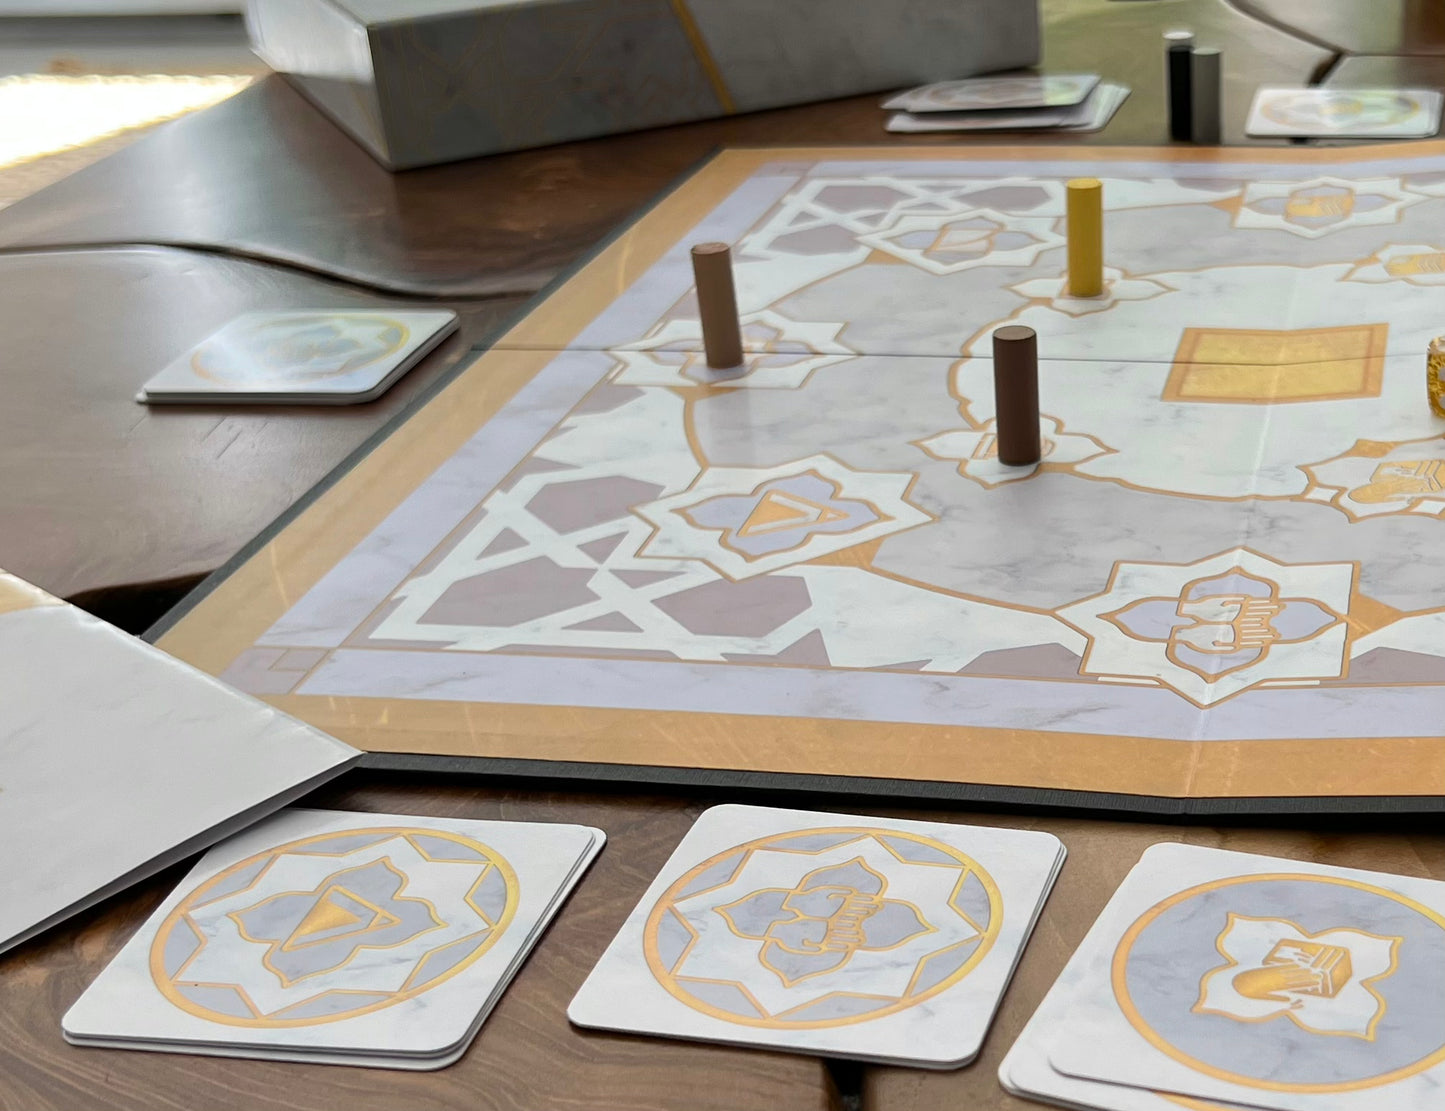 Pilgrims of Life - The Board Game